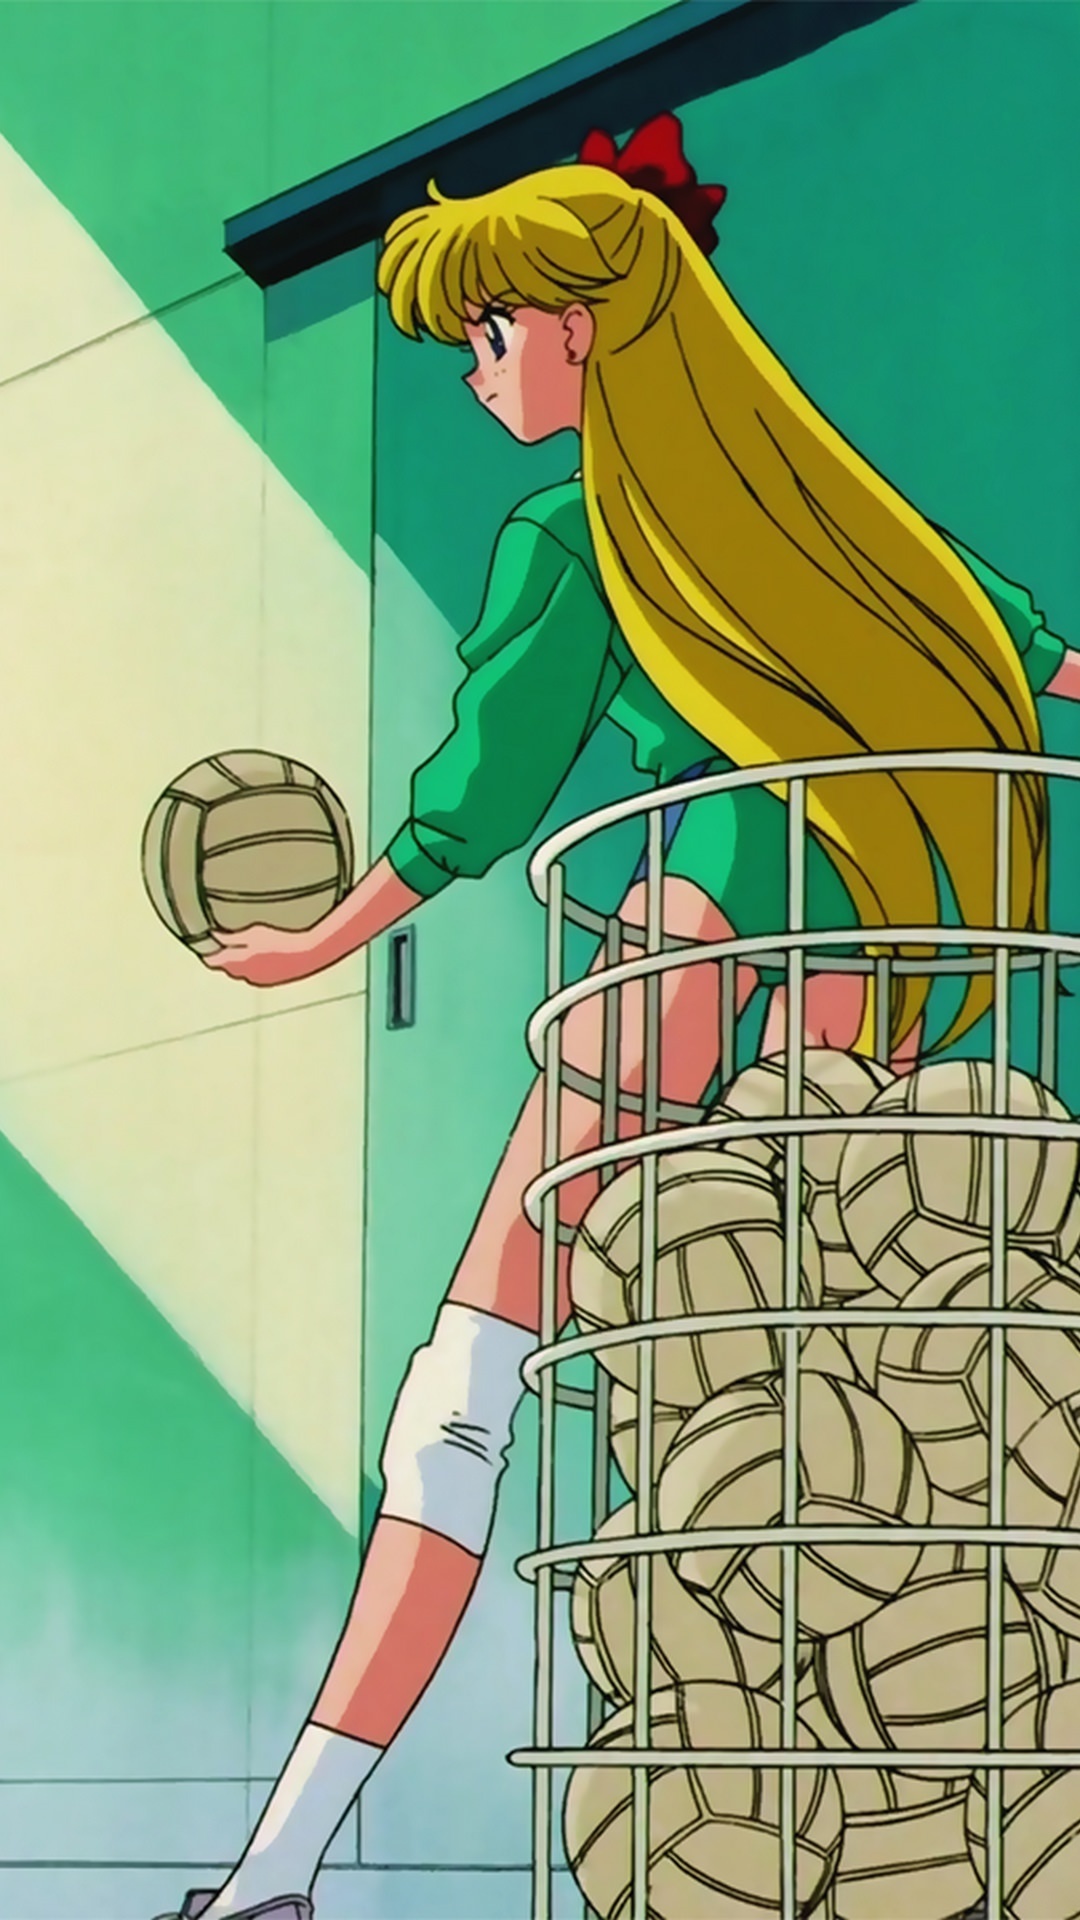 A cartoon character is carrying balls in her arms - Volleyball